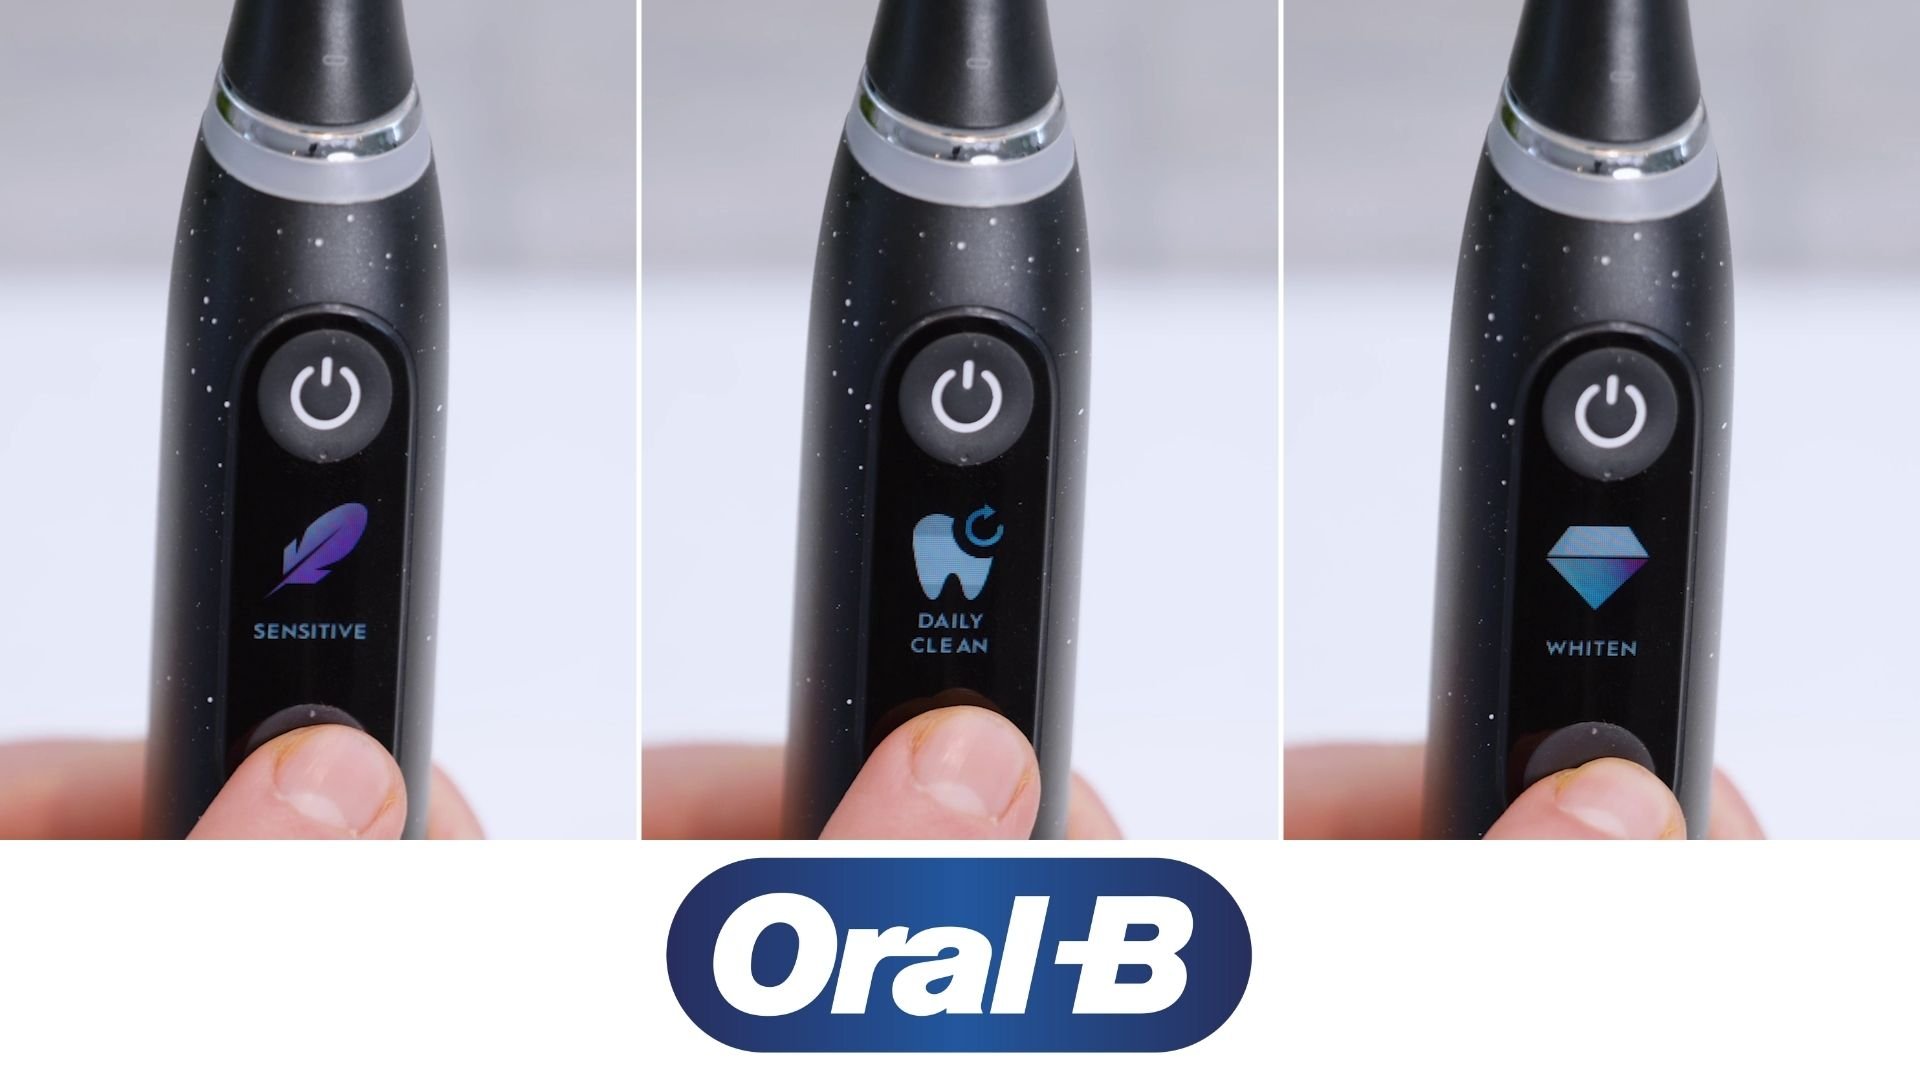 Oral-B cleaning modes explained 11